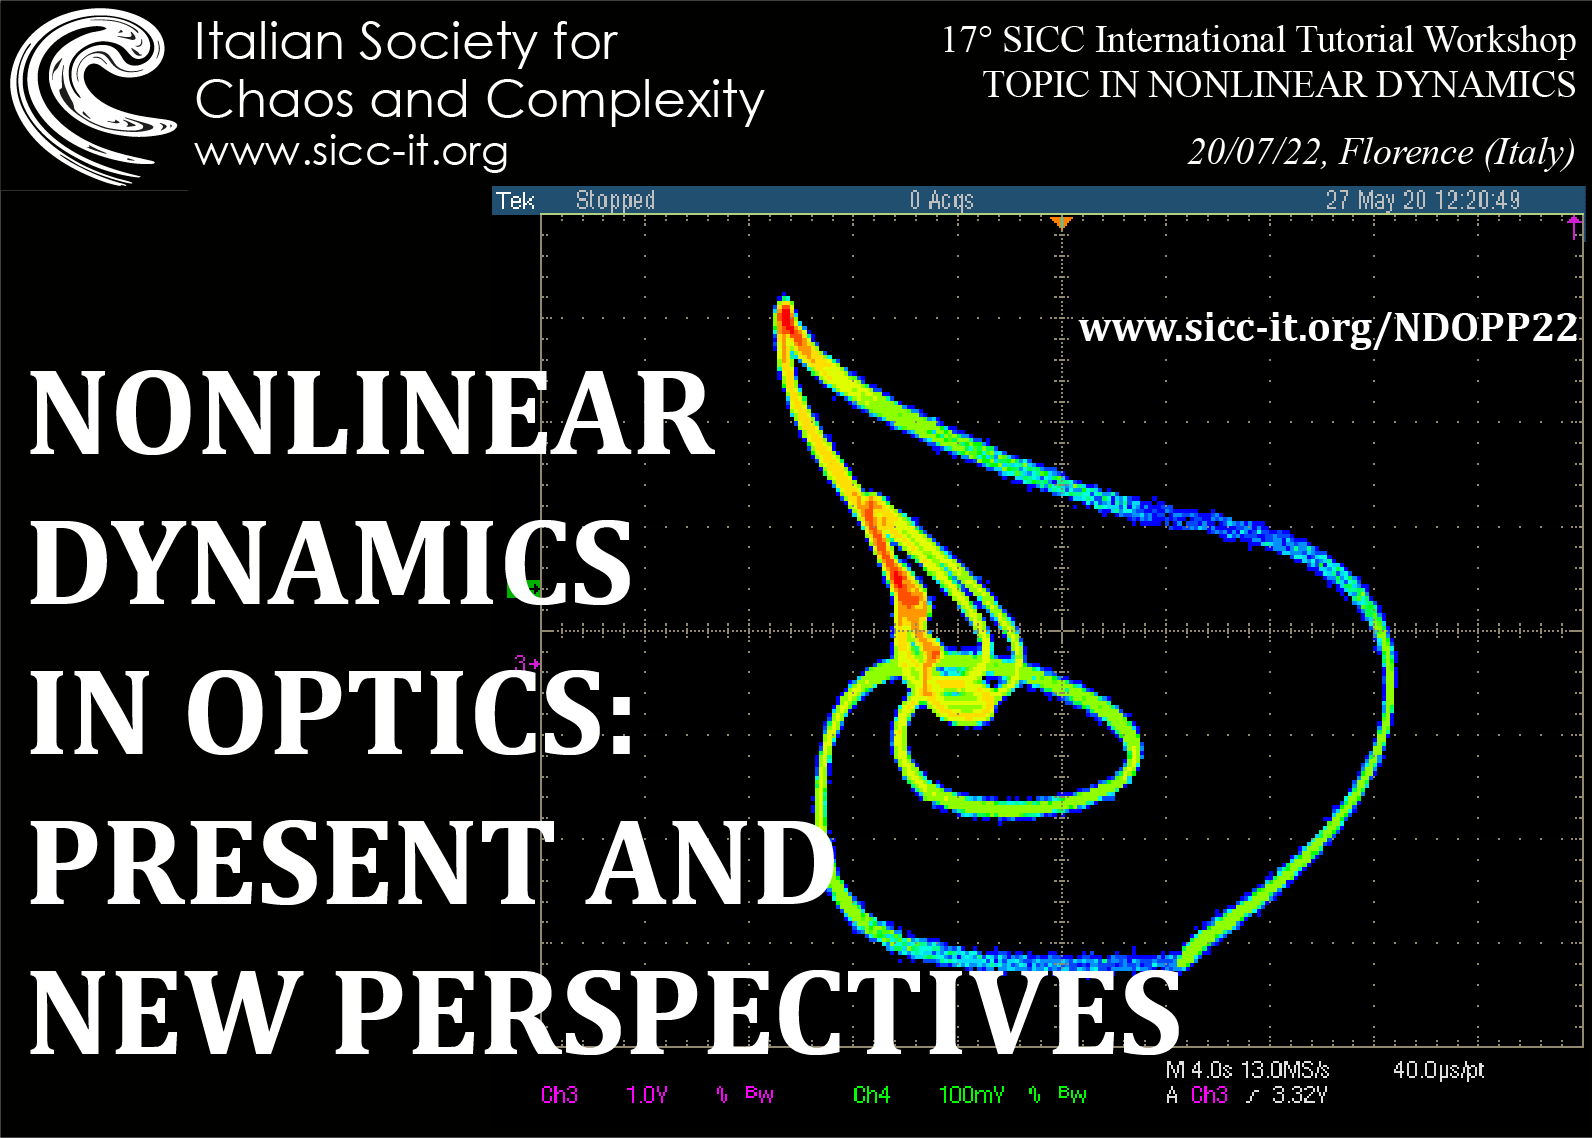 NONLINEAR DYNAMICS IN OPTICS: PRESENT AND NEW PERSPECTIVES